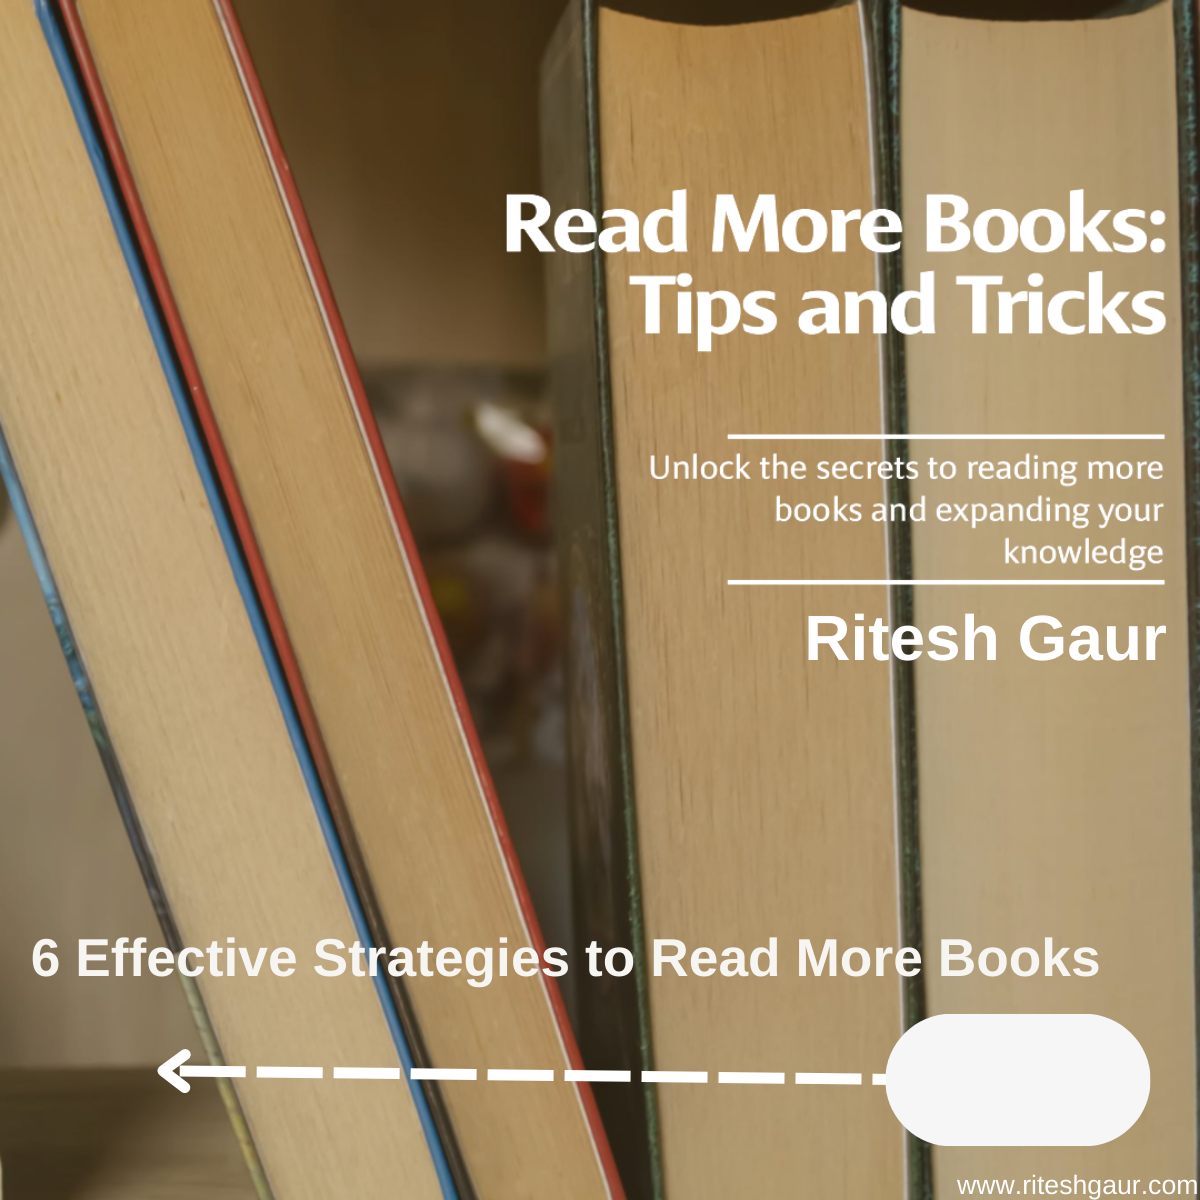 6 Effective Strategies to Read More Books